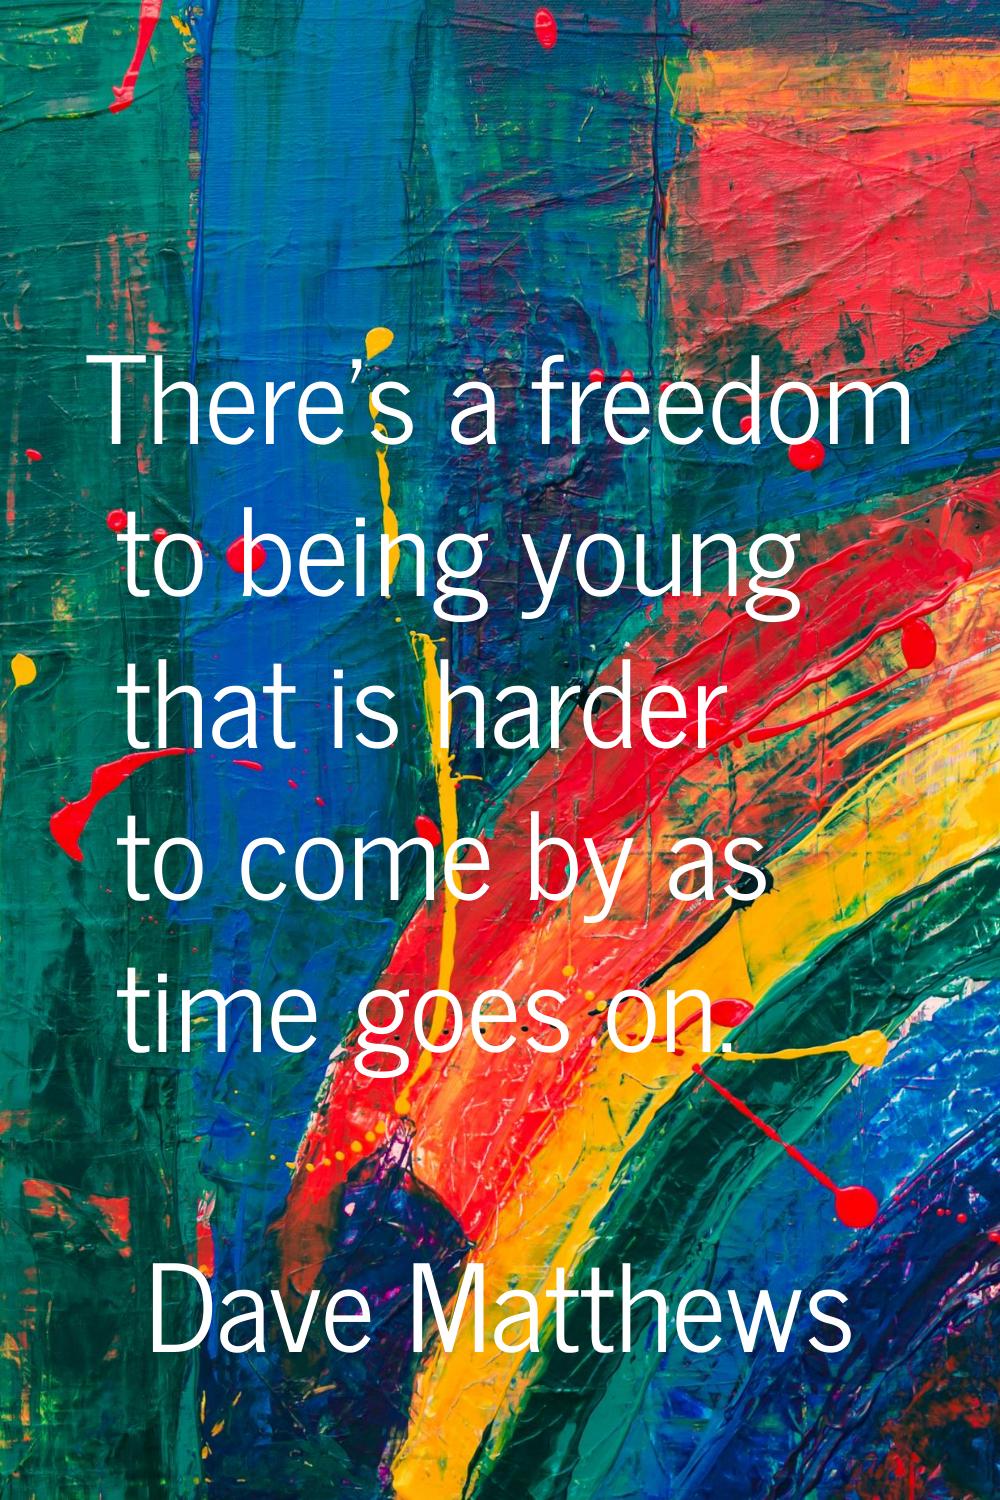 There's a freedom to being young that is harder to come by as time goes on.